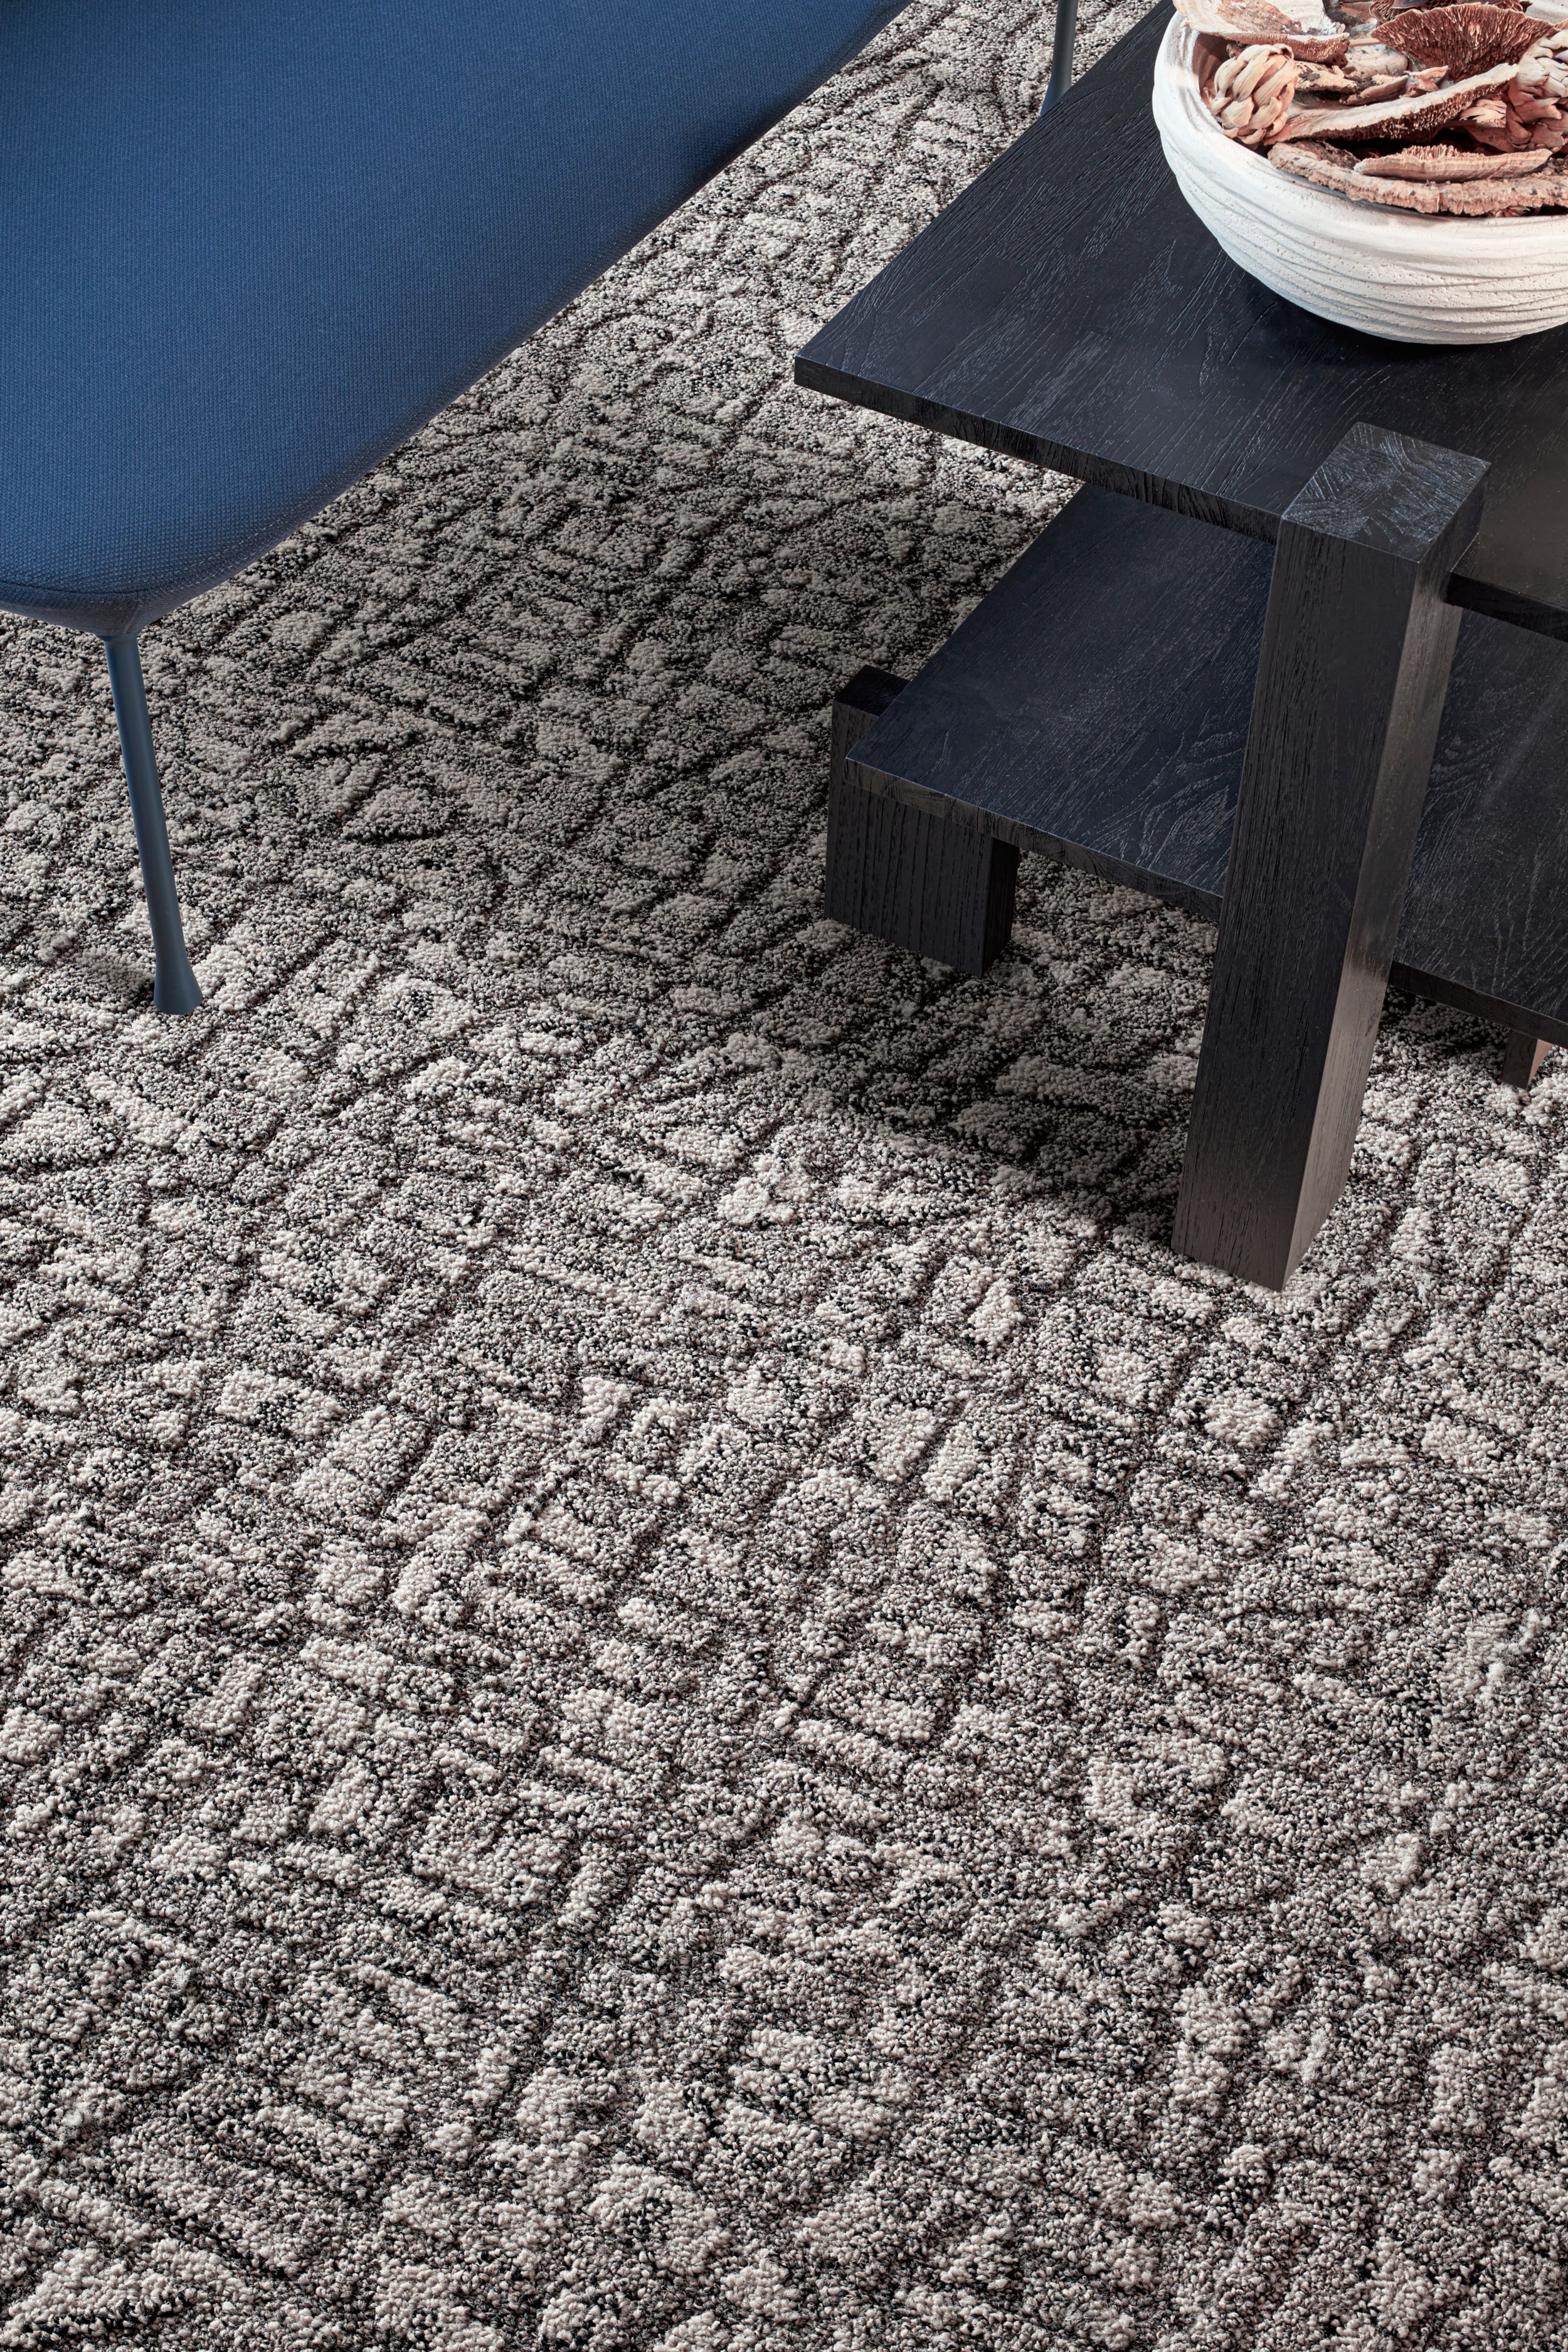 image Interface E610 carpet tile in lobby with blue bench and dark wood table numéro 3